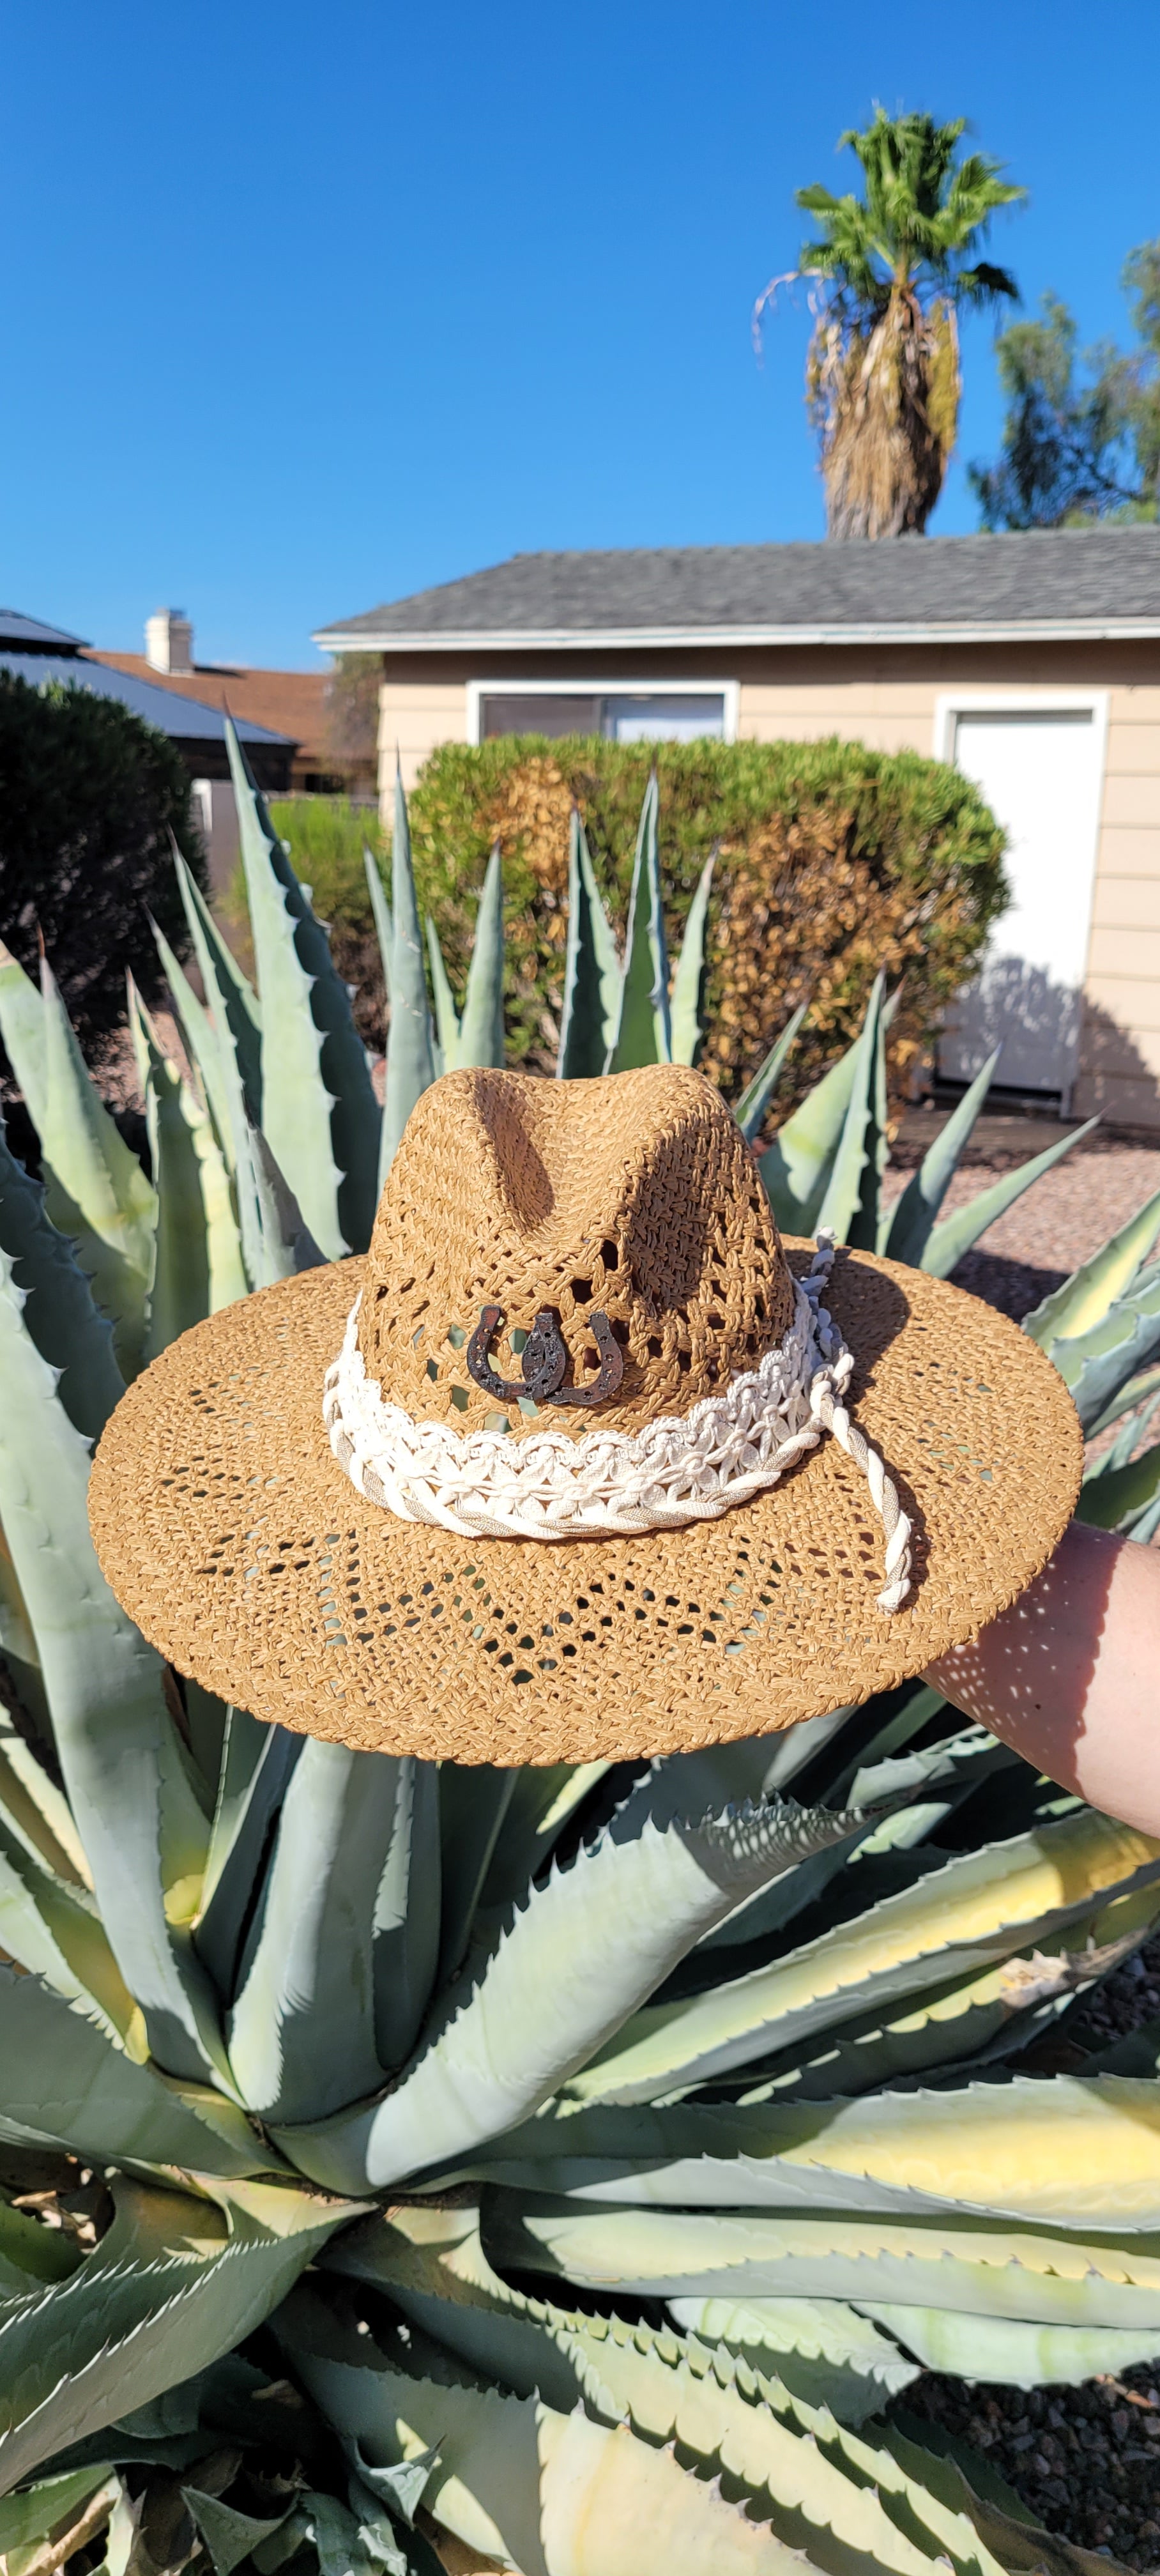 Lace ribbon, twisted gauze, metal horseshoes Straw hat Flat brim 65% polyester and 35% cotton Ribbon drawstring for hat size adjustment Head Circumference: 24" Crown Height: 5" Brim Length: 15.75" Brim Width: 14.75" Branded & numbered inside crown Custom designed by Kayla